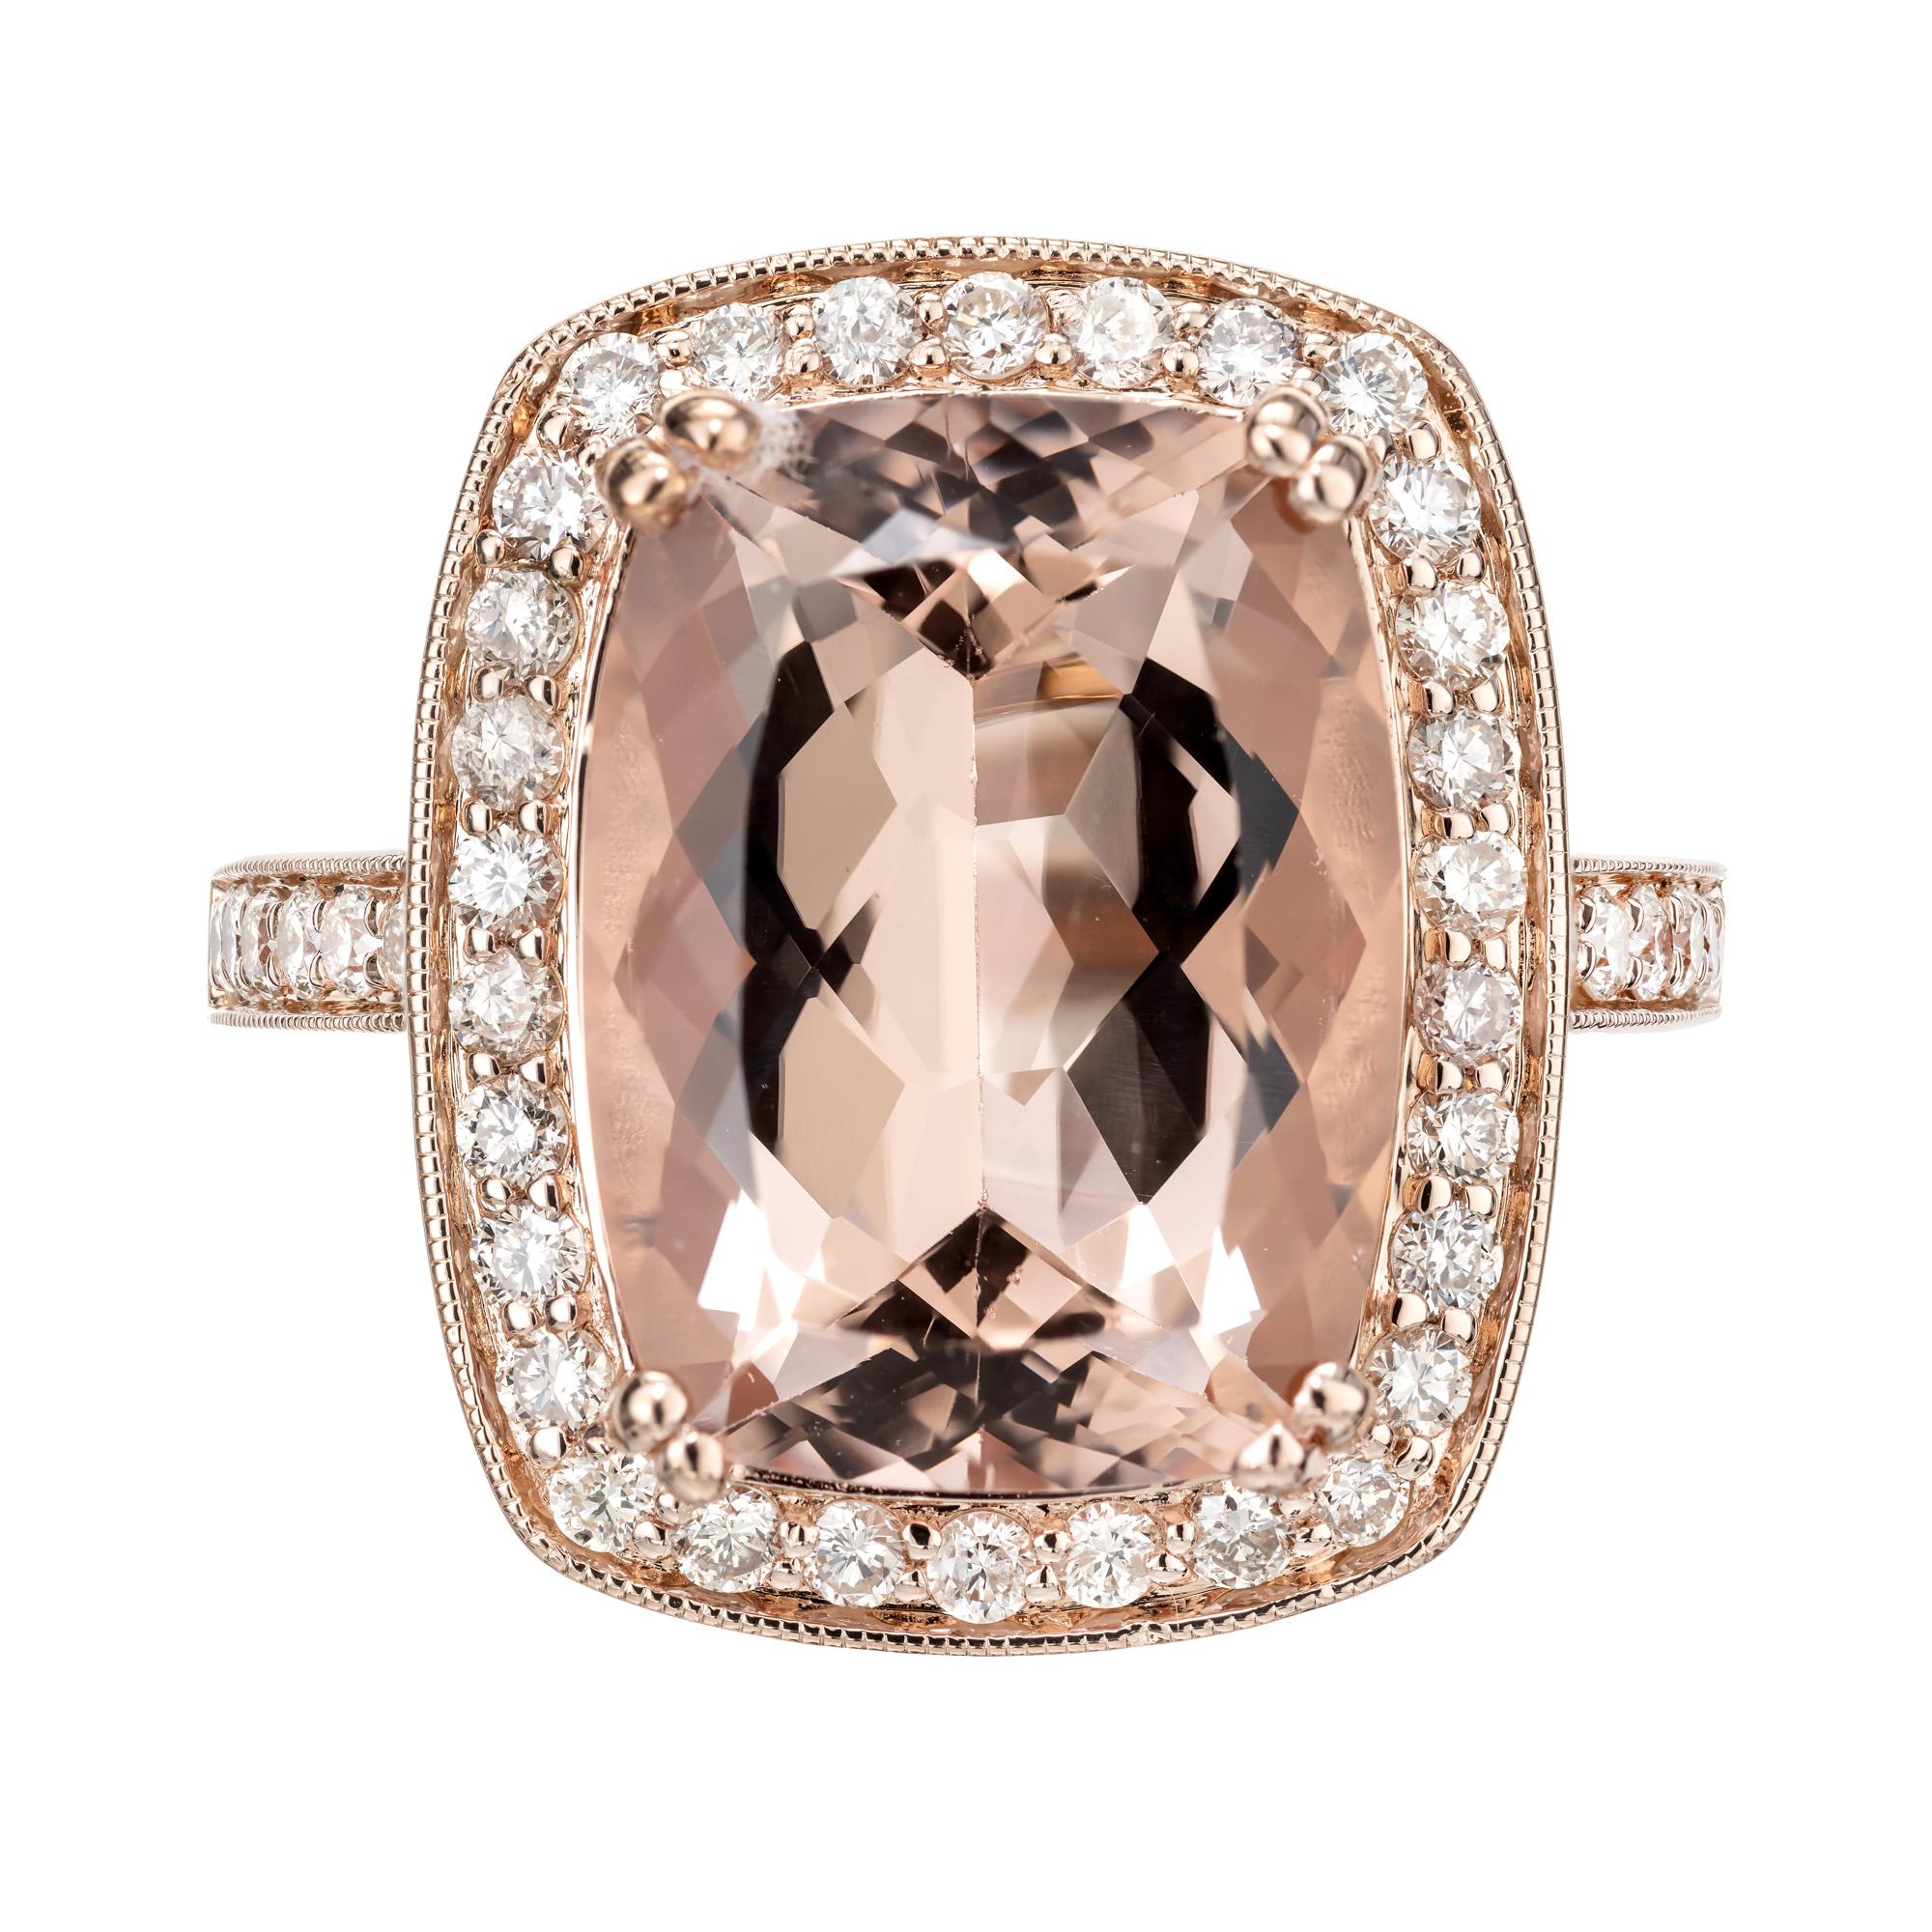 Stunning large pink morganite and diamond cocktail ring. This substantial cushion cut light pink morganite comes in at 9.50cts. Set in a 14k rose gold setting with halo of round cut diamonds along with accent diamonds on each side of the shank. 